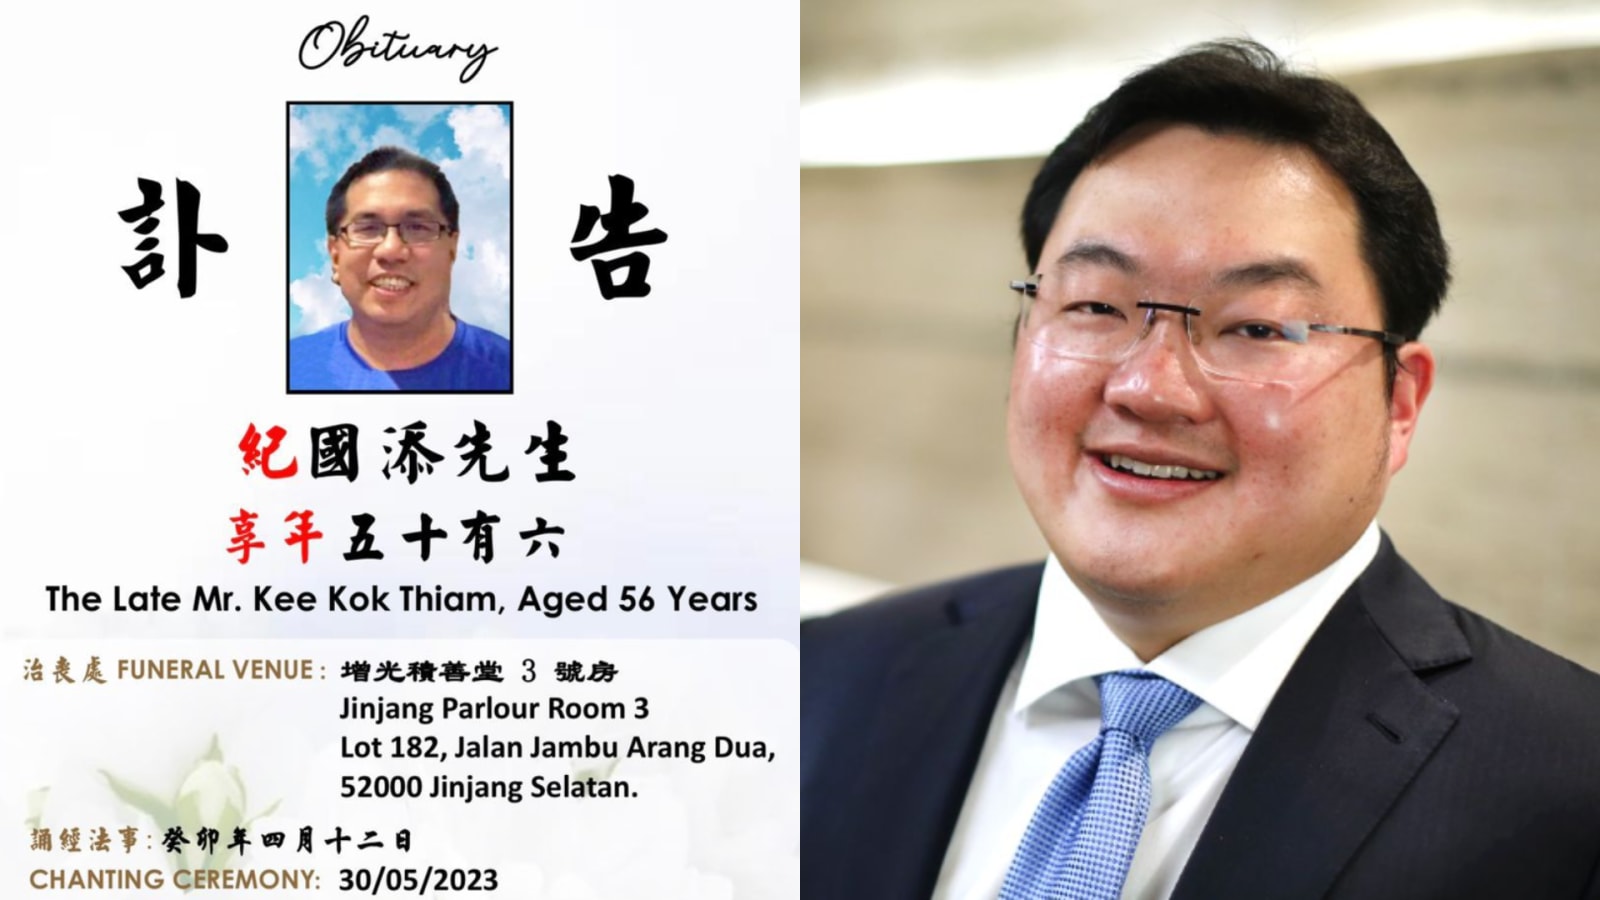 1MDB suspect questioned about Jho Low dies of stroke in Malaysia